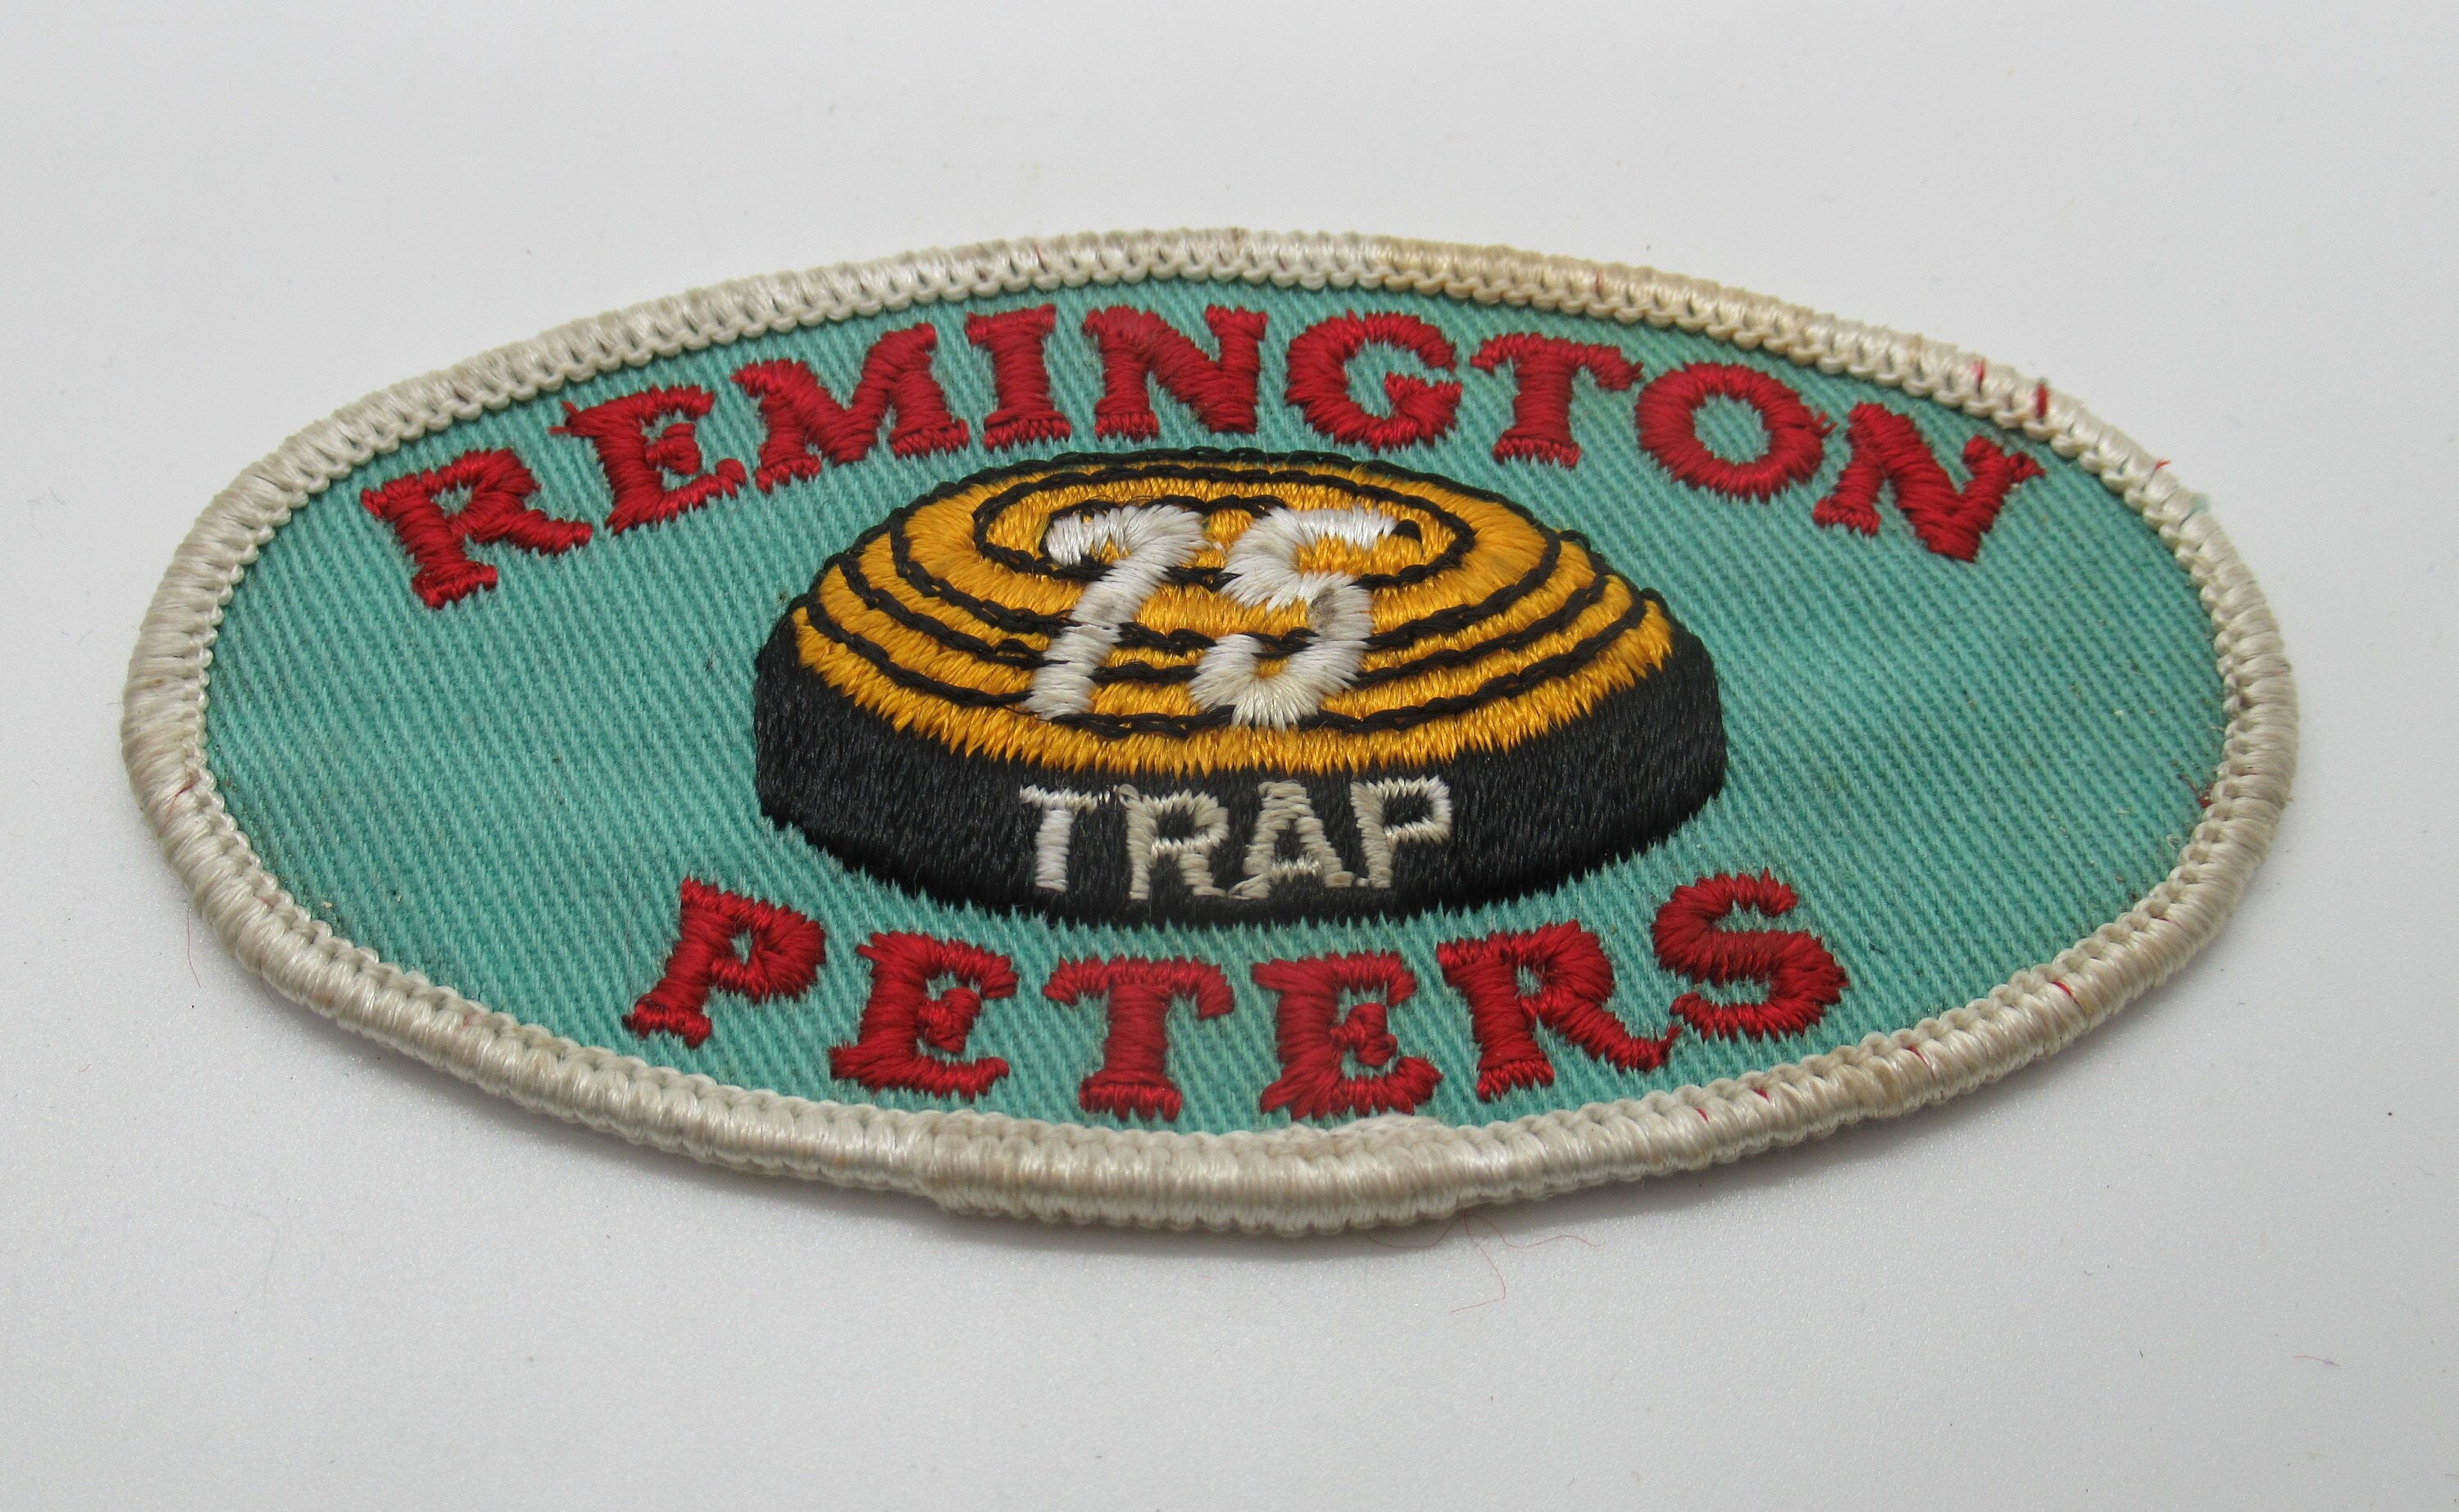 Remington 200 Skeet Embroidered Patch 4” 